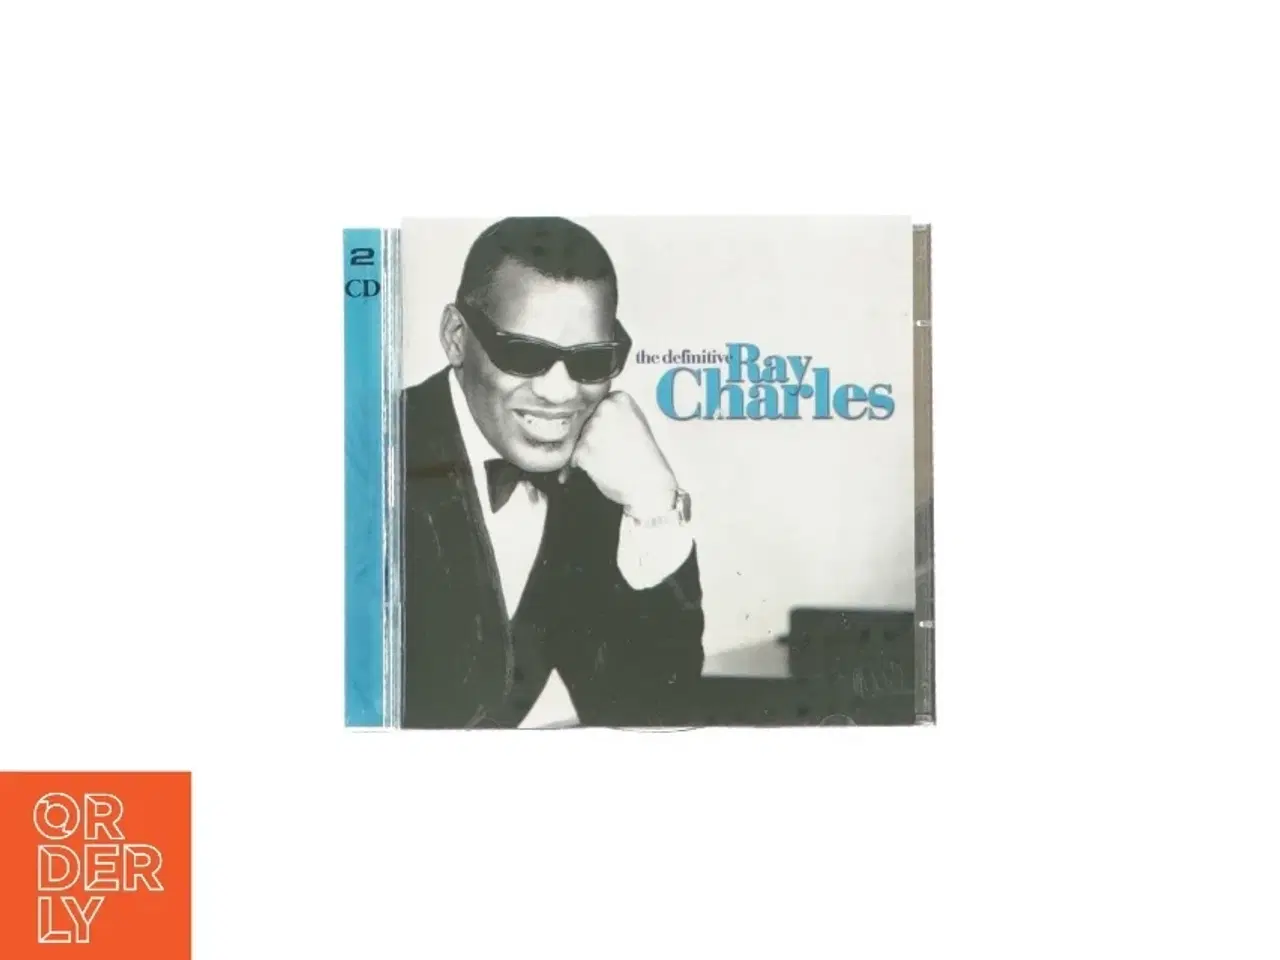 Billede 1 - The Definitive Ray Charles CD